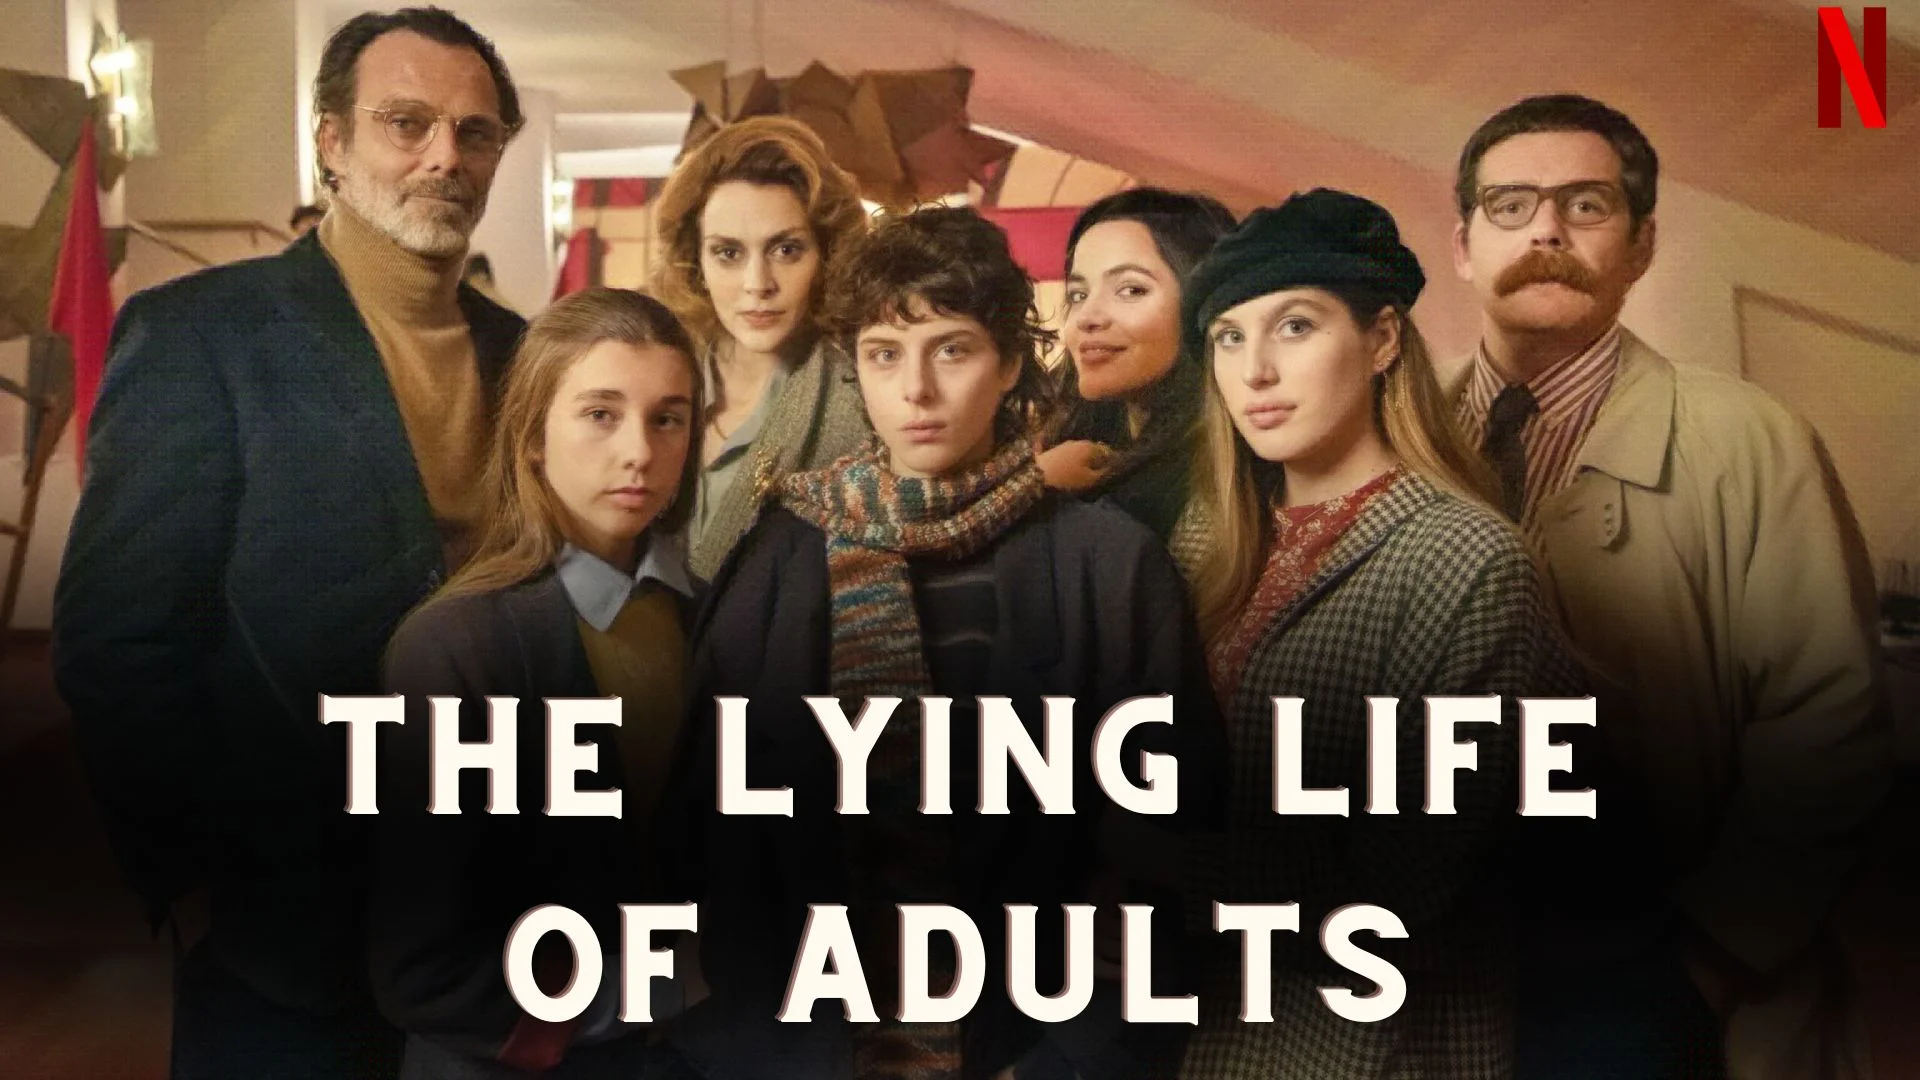 The Lying Life of Adults Parents Guide and Age Rating (2022)